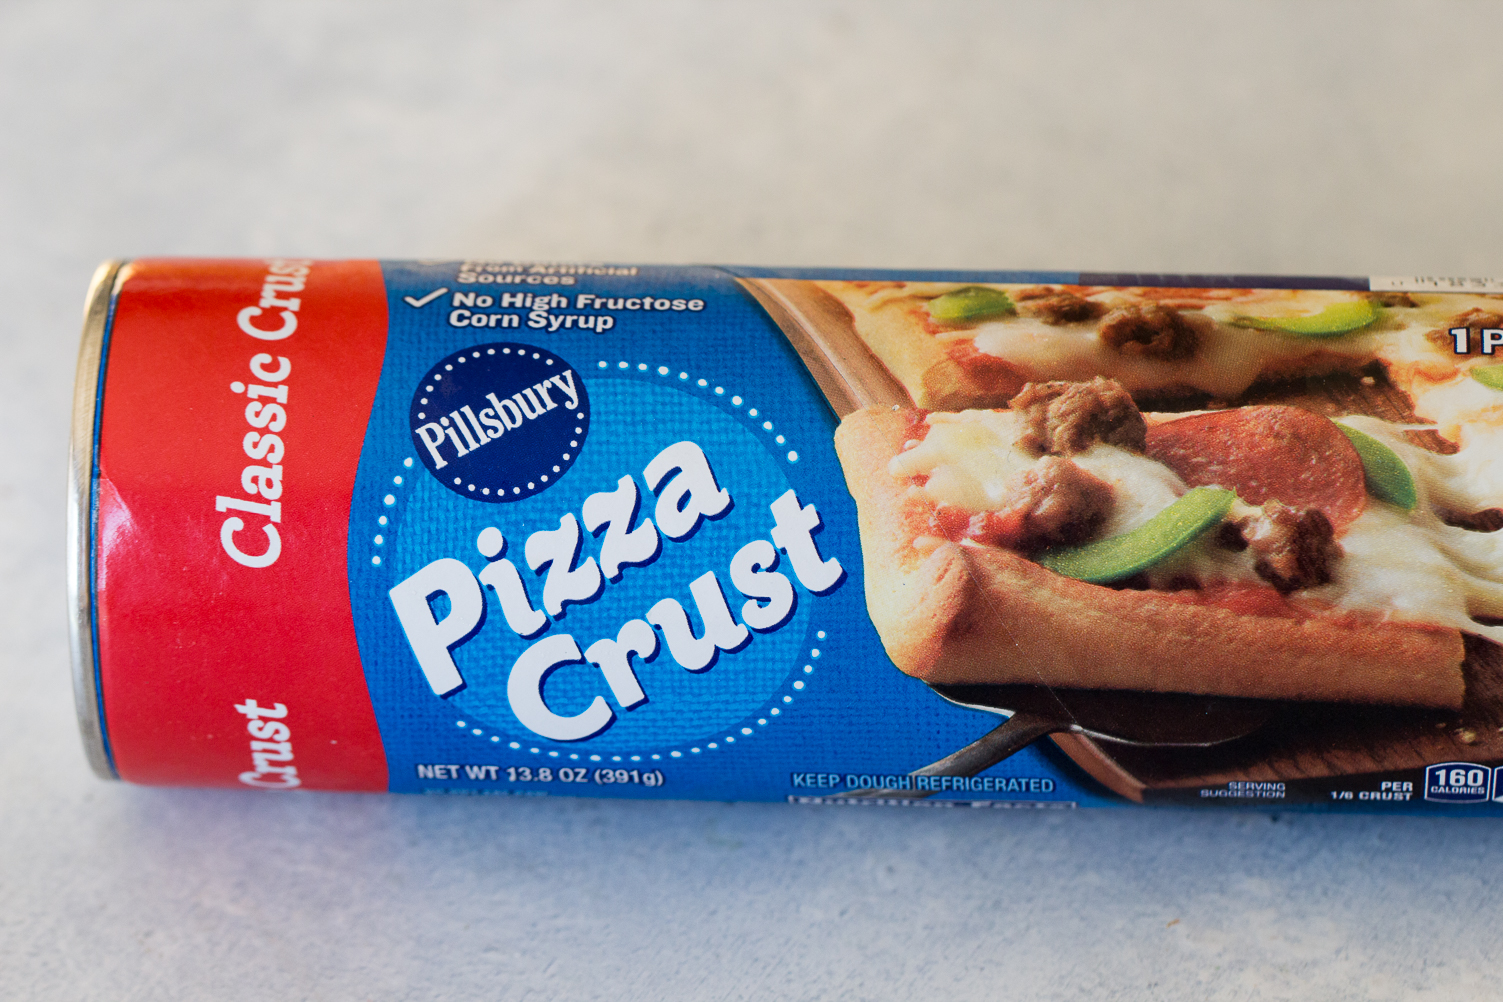 A tube of Pizza Crust